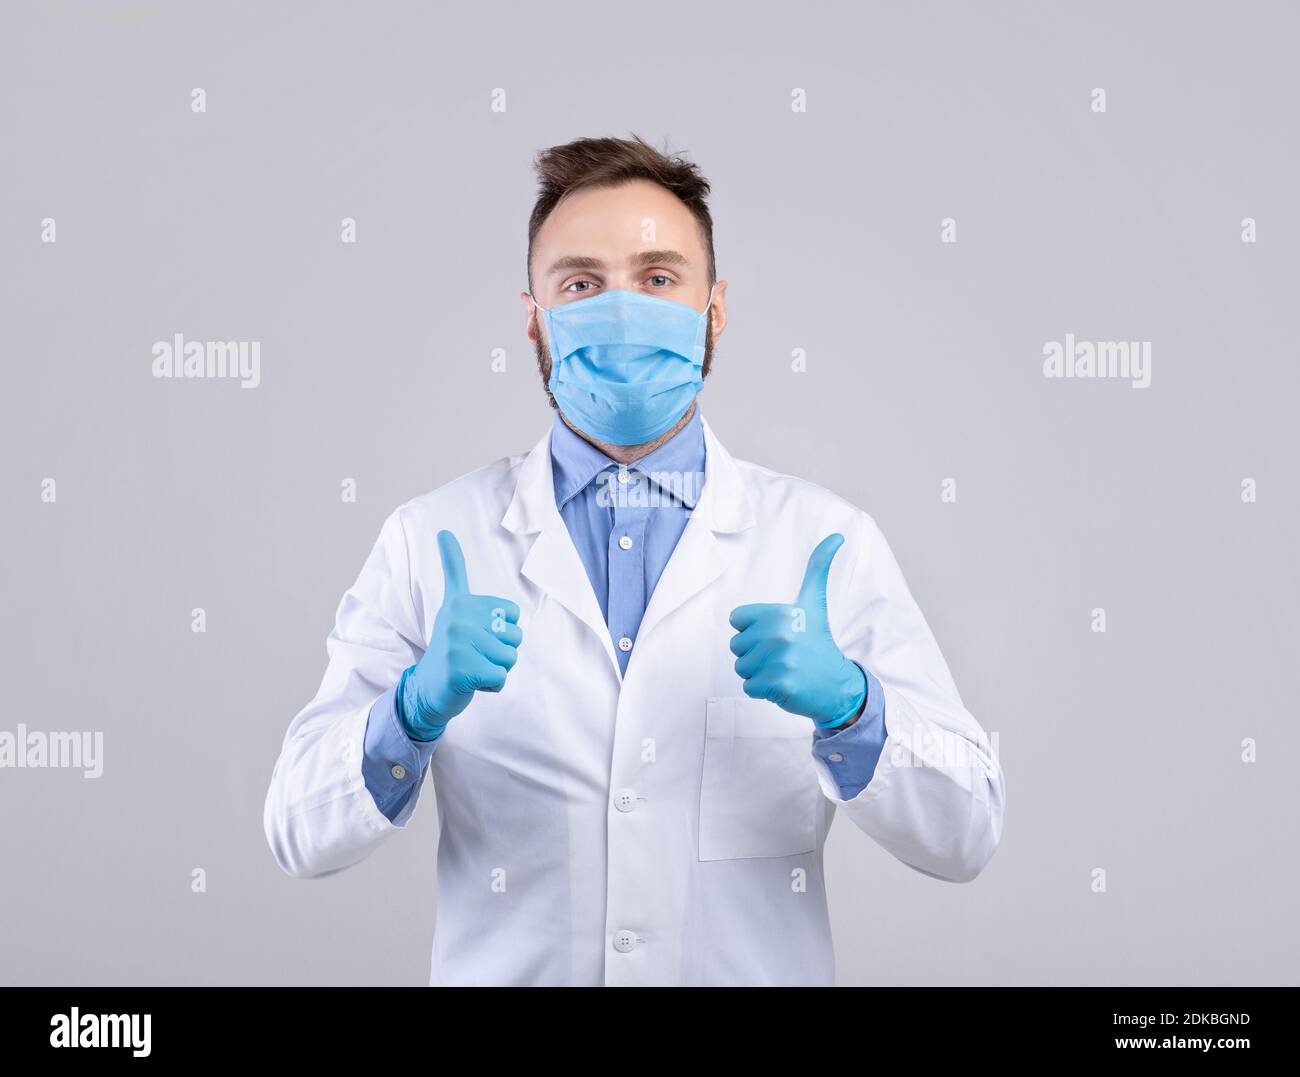 Millennial doctor in uniform, face mask and gloves looking at camera and showing thumbs up gesture over grey background Stock Photo